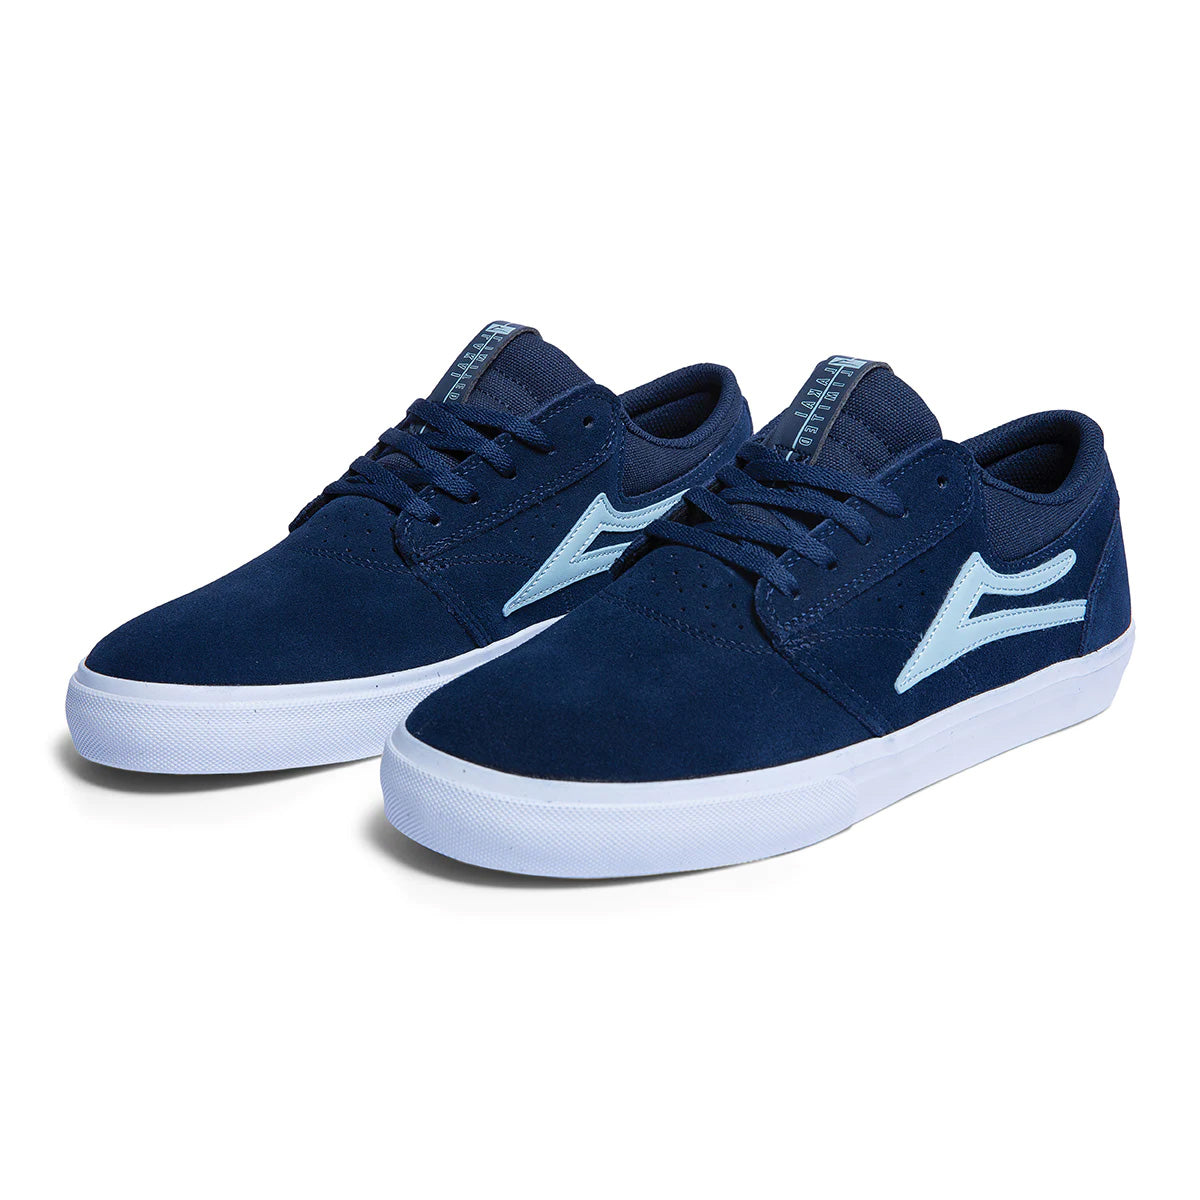 Lakai Griffin Shoes - Navy Suede